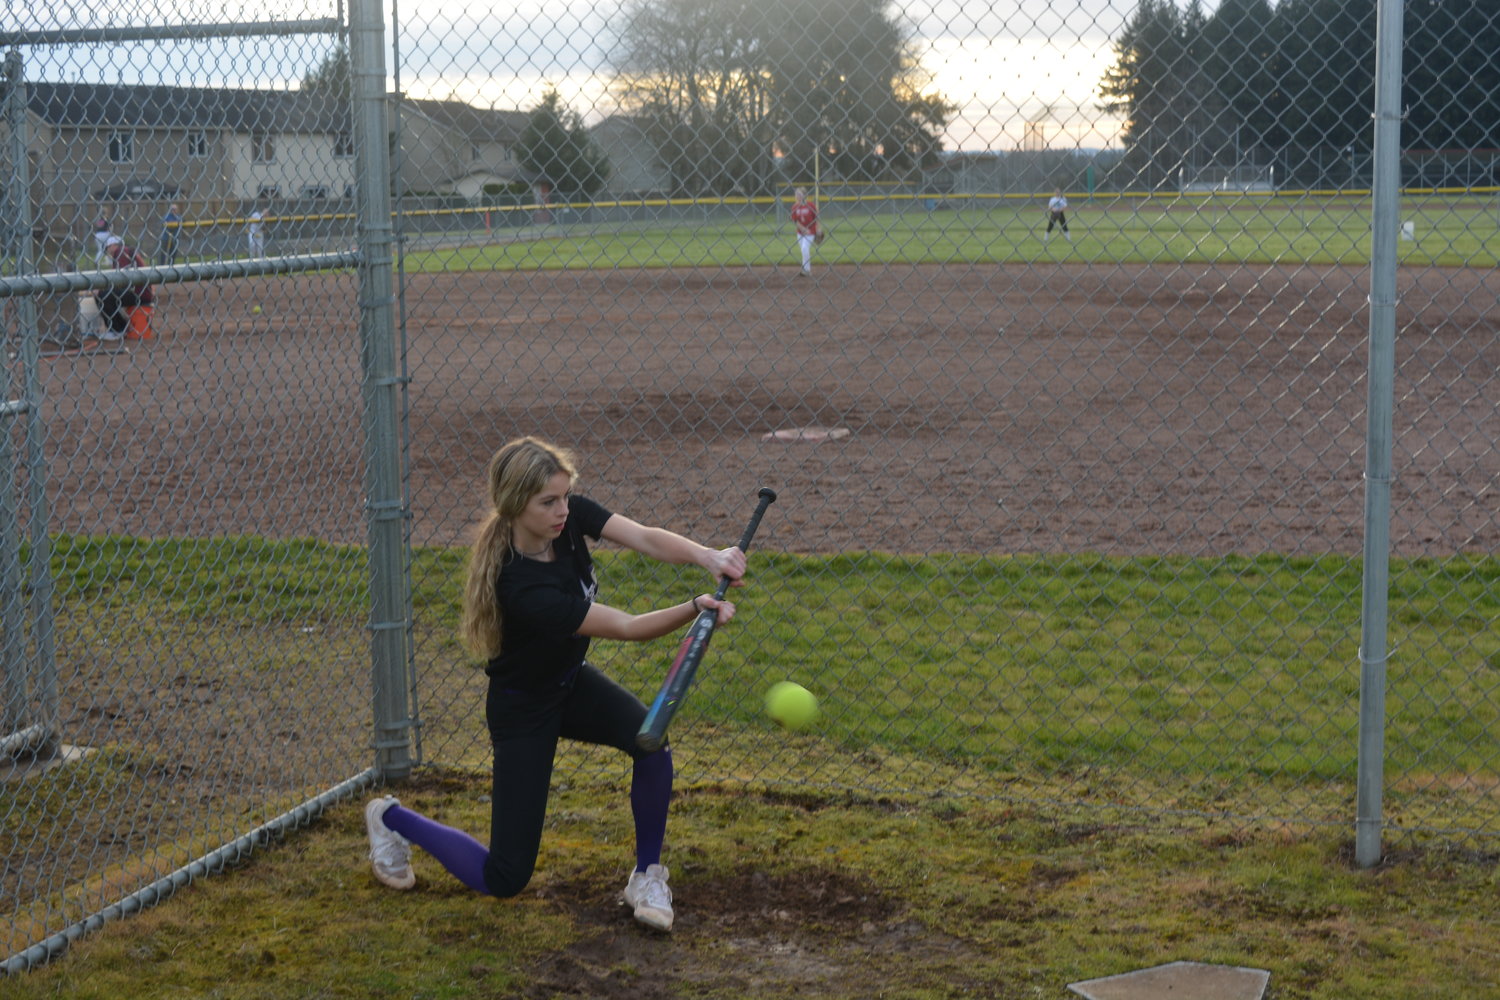 Ashley Porter practices her bunting skills at Prairie High School during softball practice on March 10 in preparation for the first game against Camas.